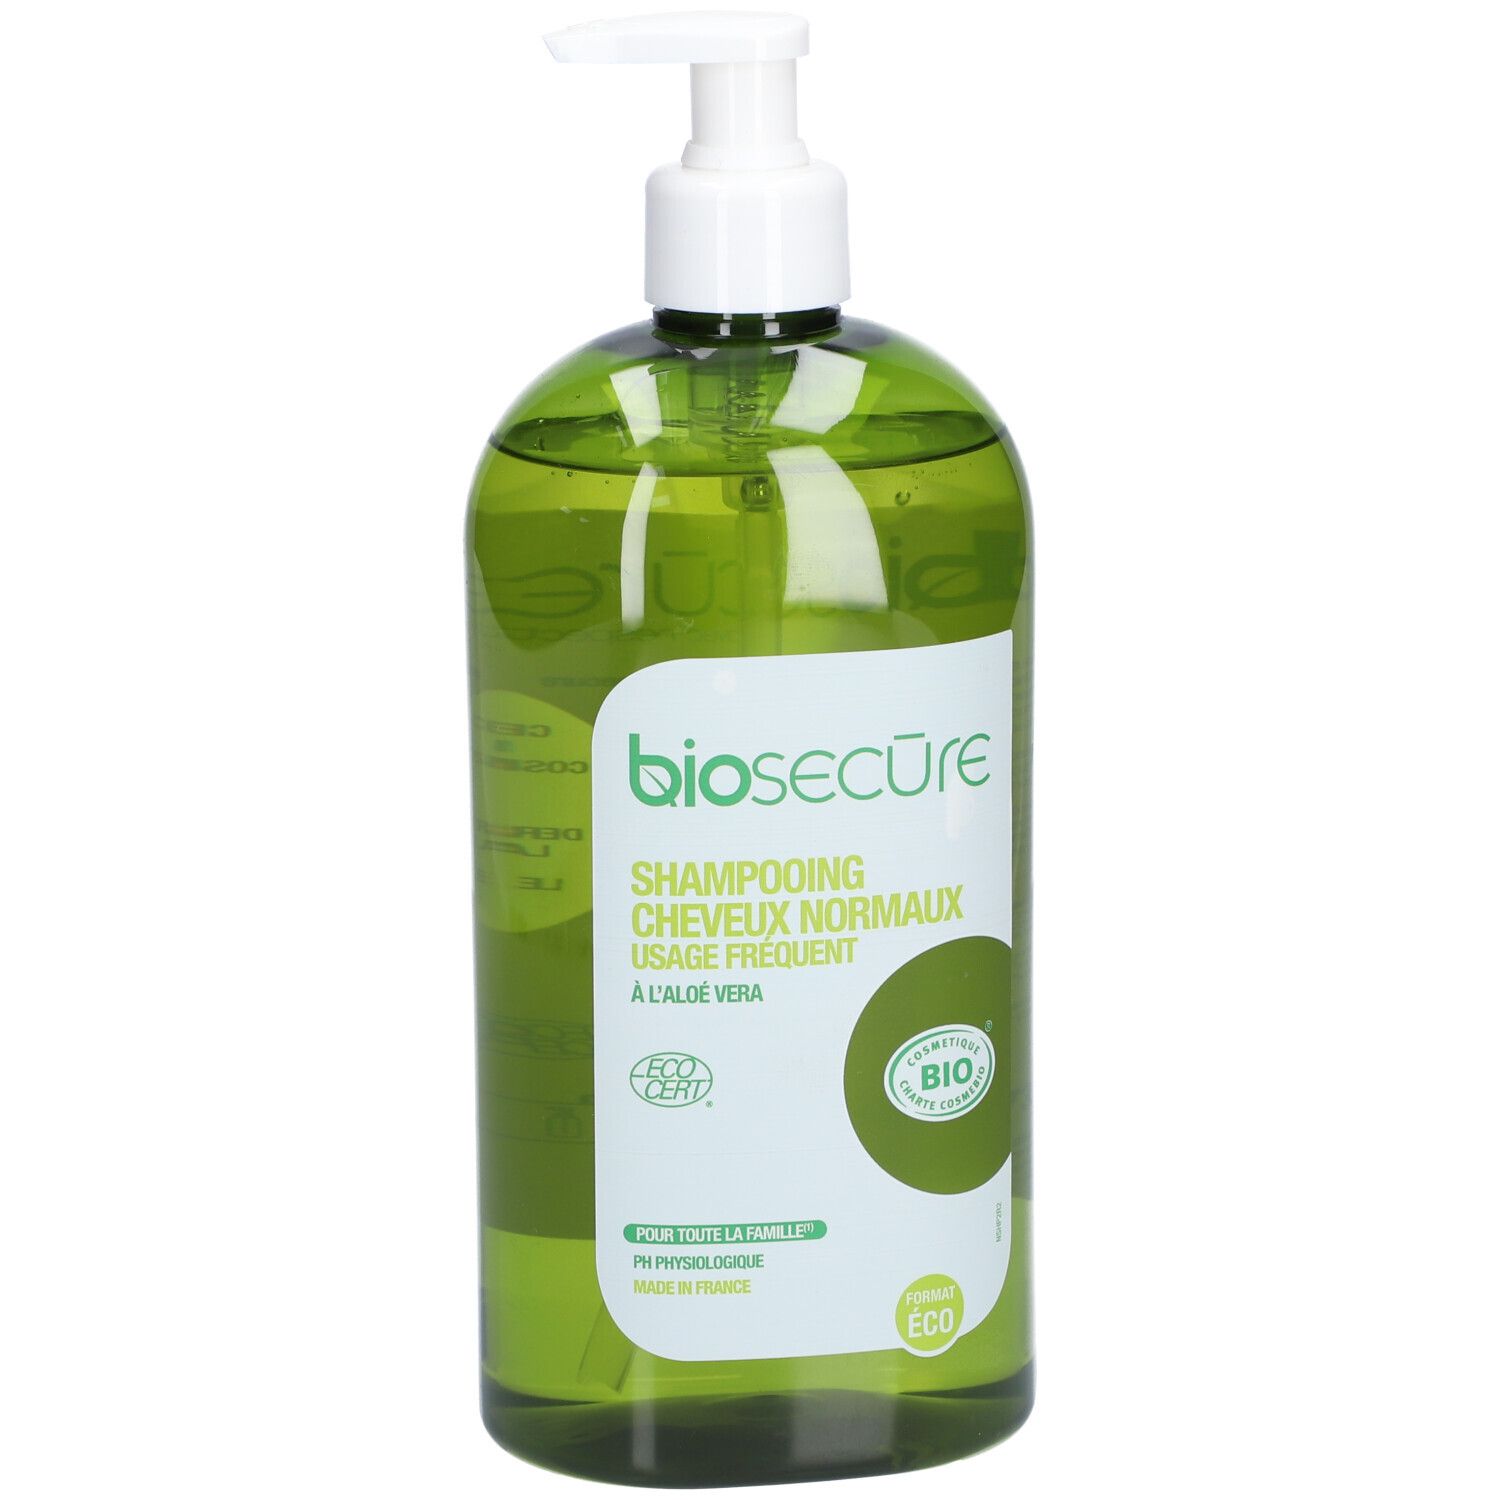 Bio Secure Shampooing cheveux normaux